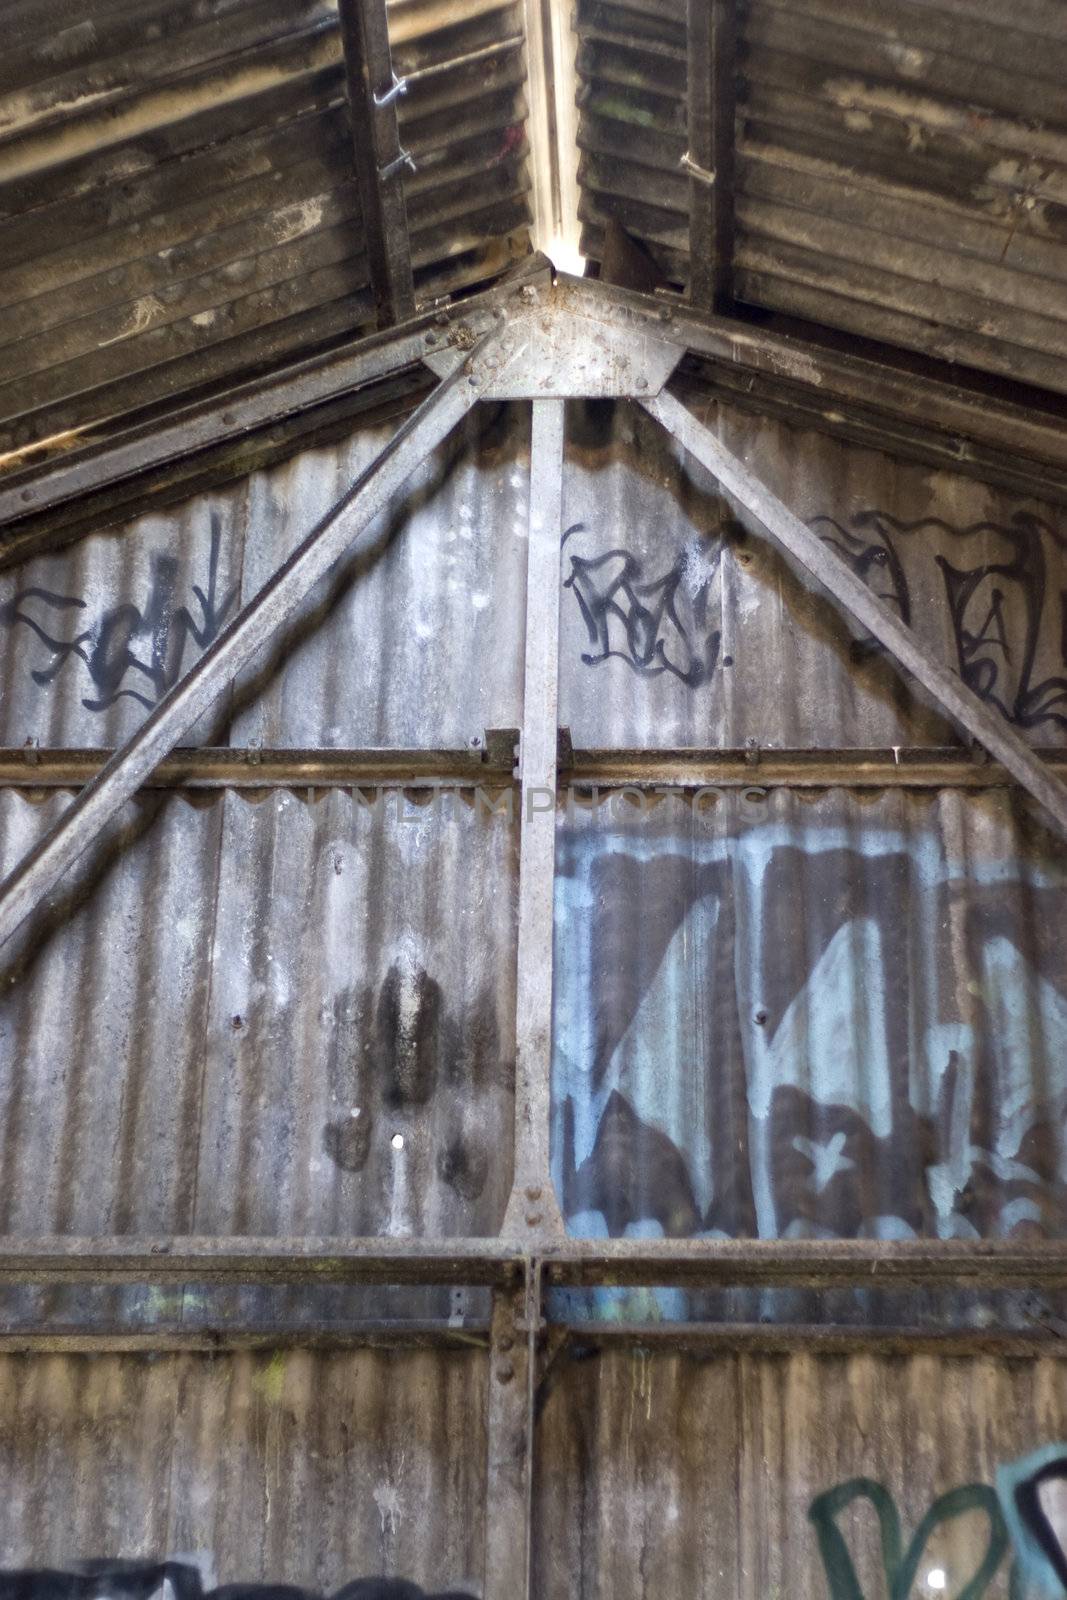 An old structure that is covered with graffiti.